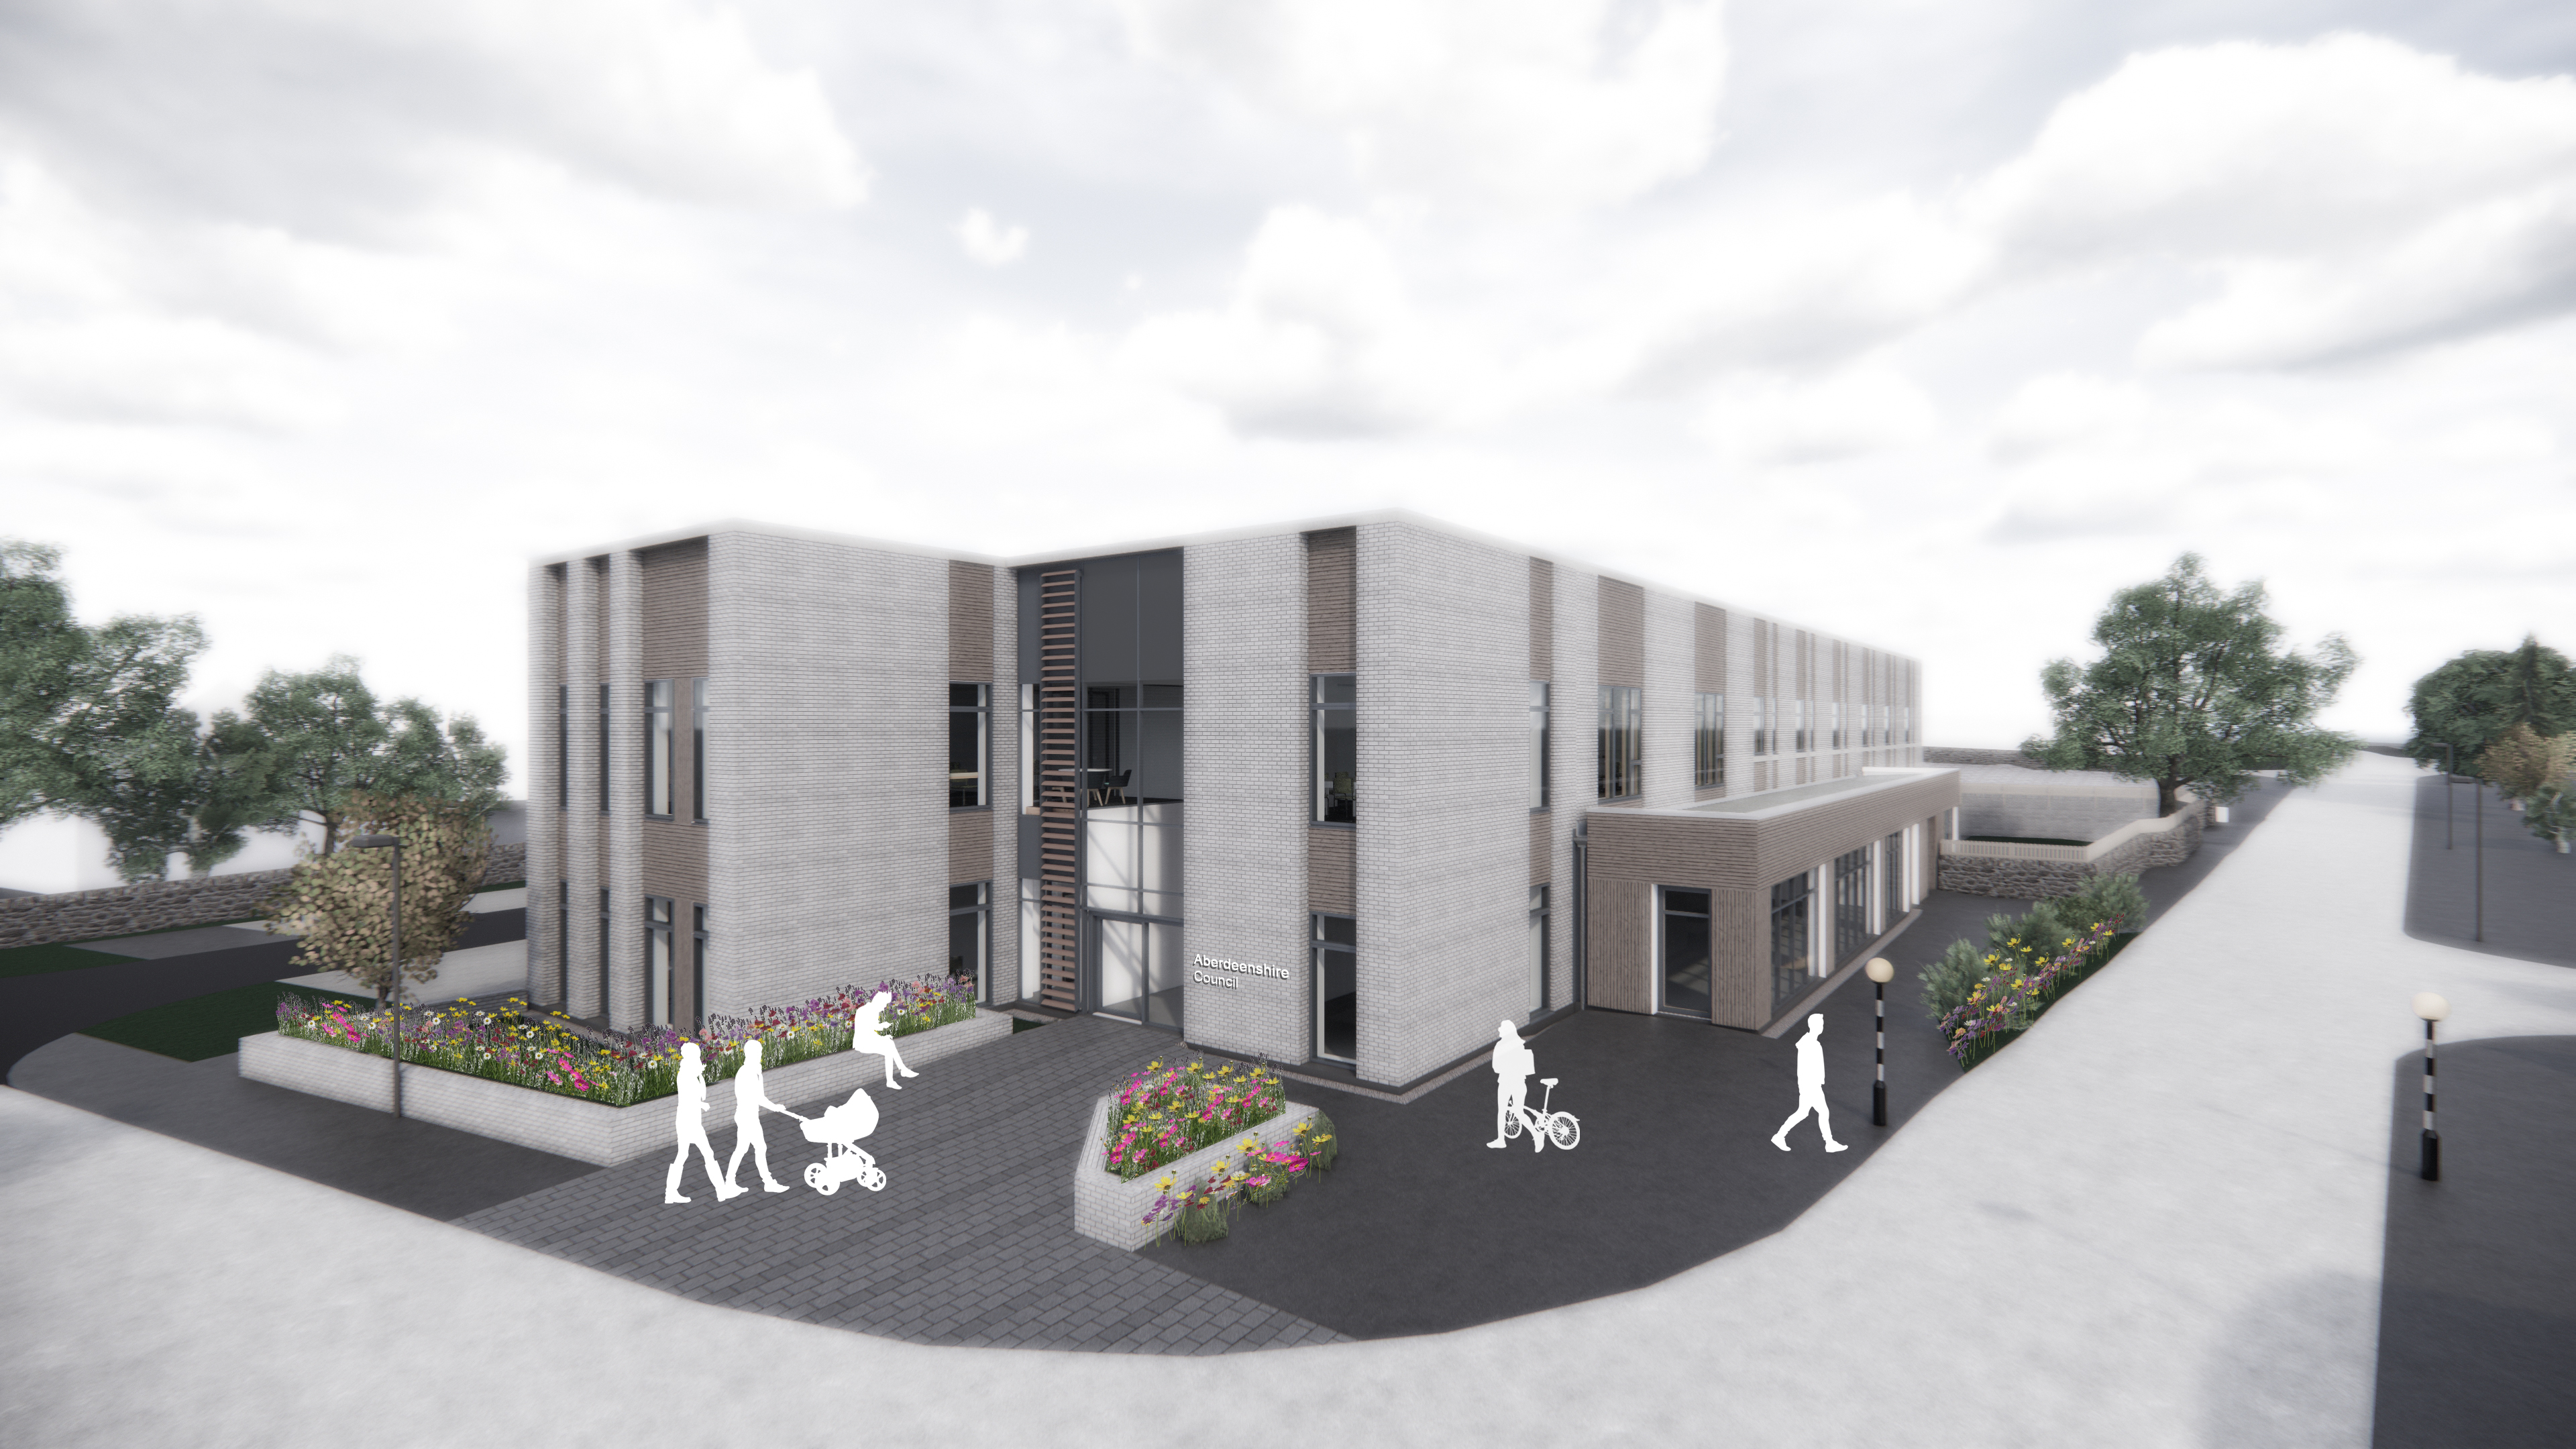 New Ellon office and community facilities planned by local authority